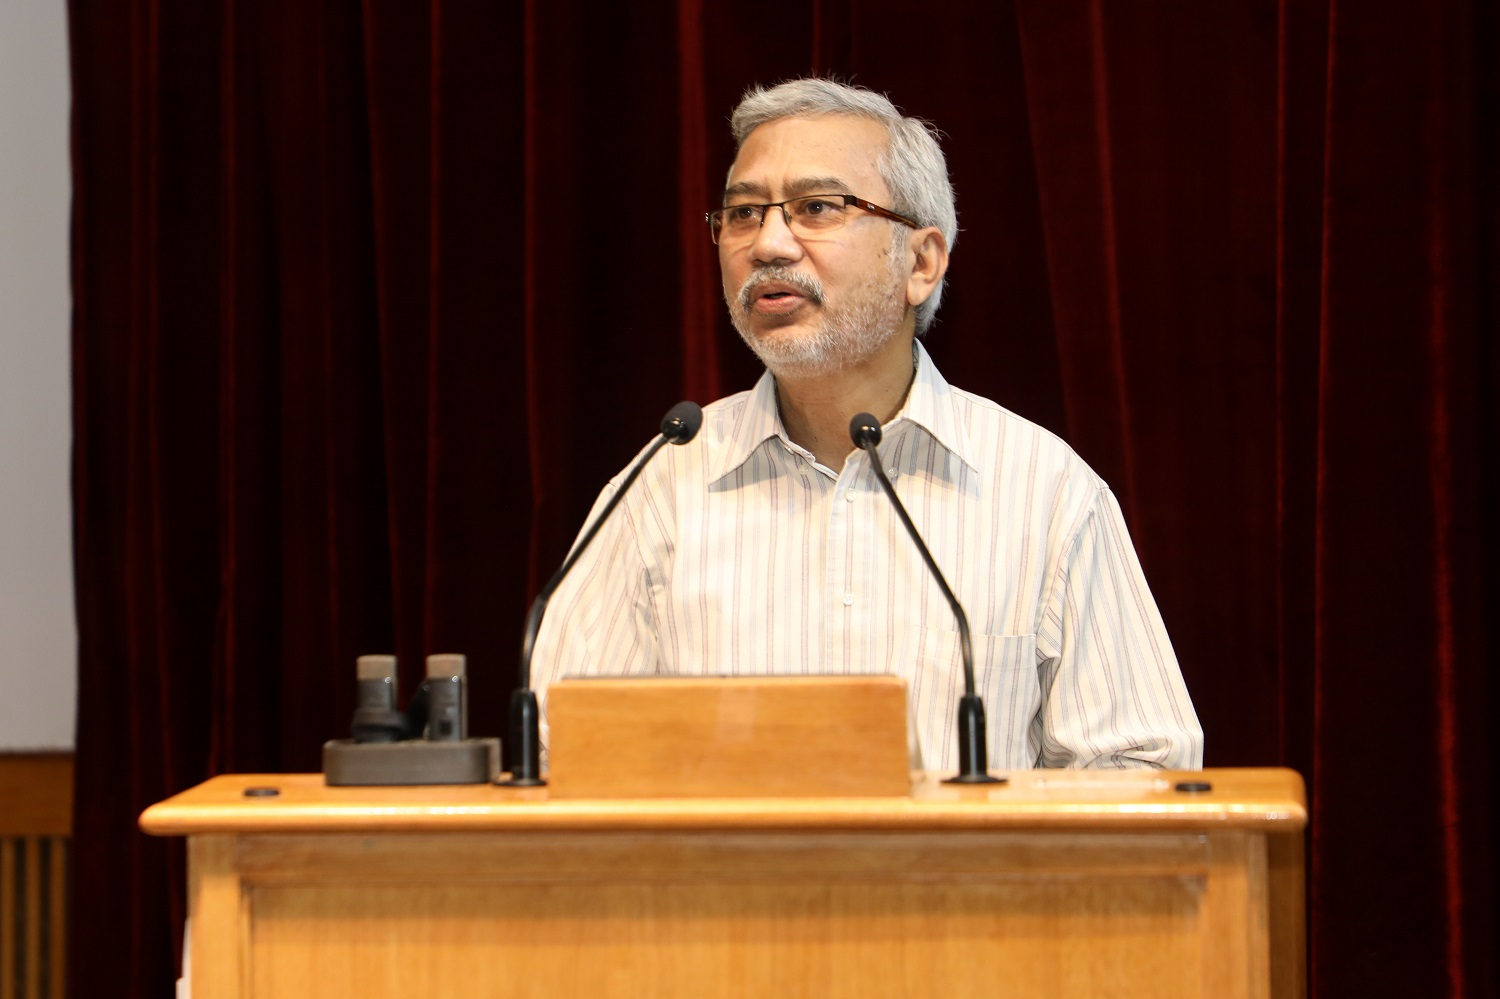 Prof. Rahul De, Dean Programmes, IIMB, welcomes the EPGP students and encouraged the students to interact with the students of other programmes on campus and leverage the rich learning experience at IIMB, at the inauguration of the EPGP Program on 25th March 2023.